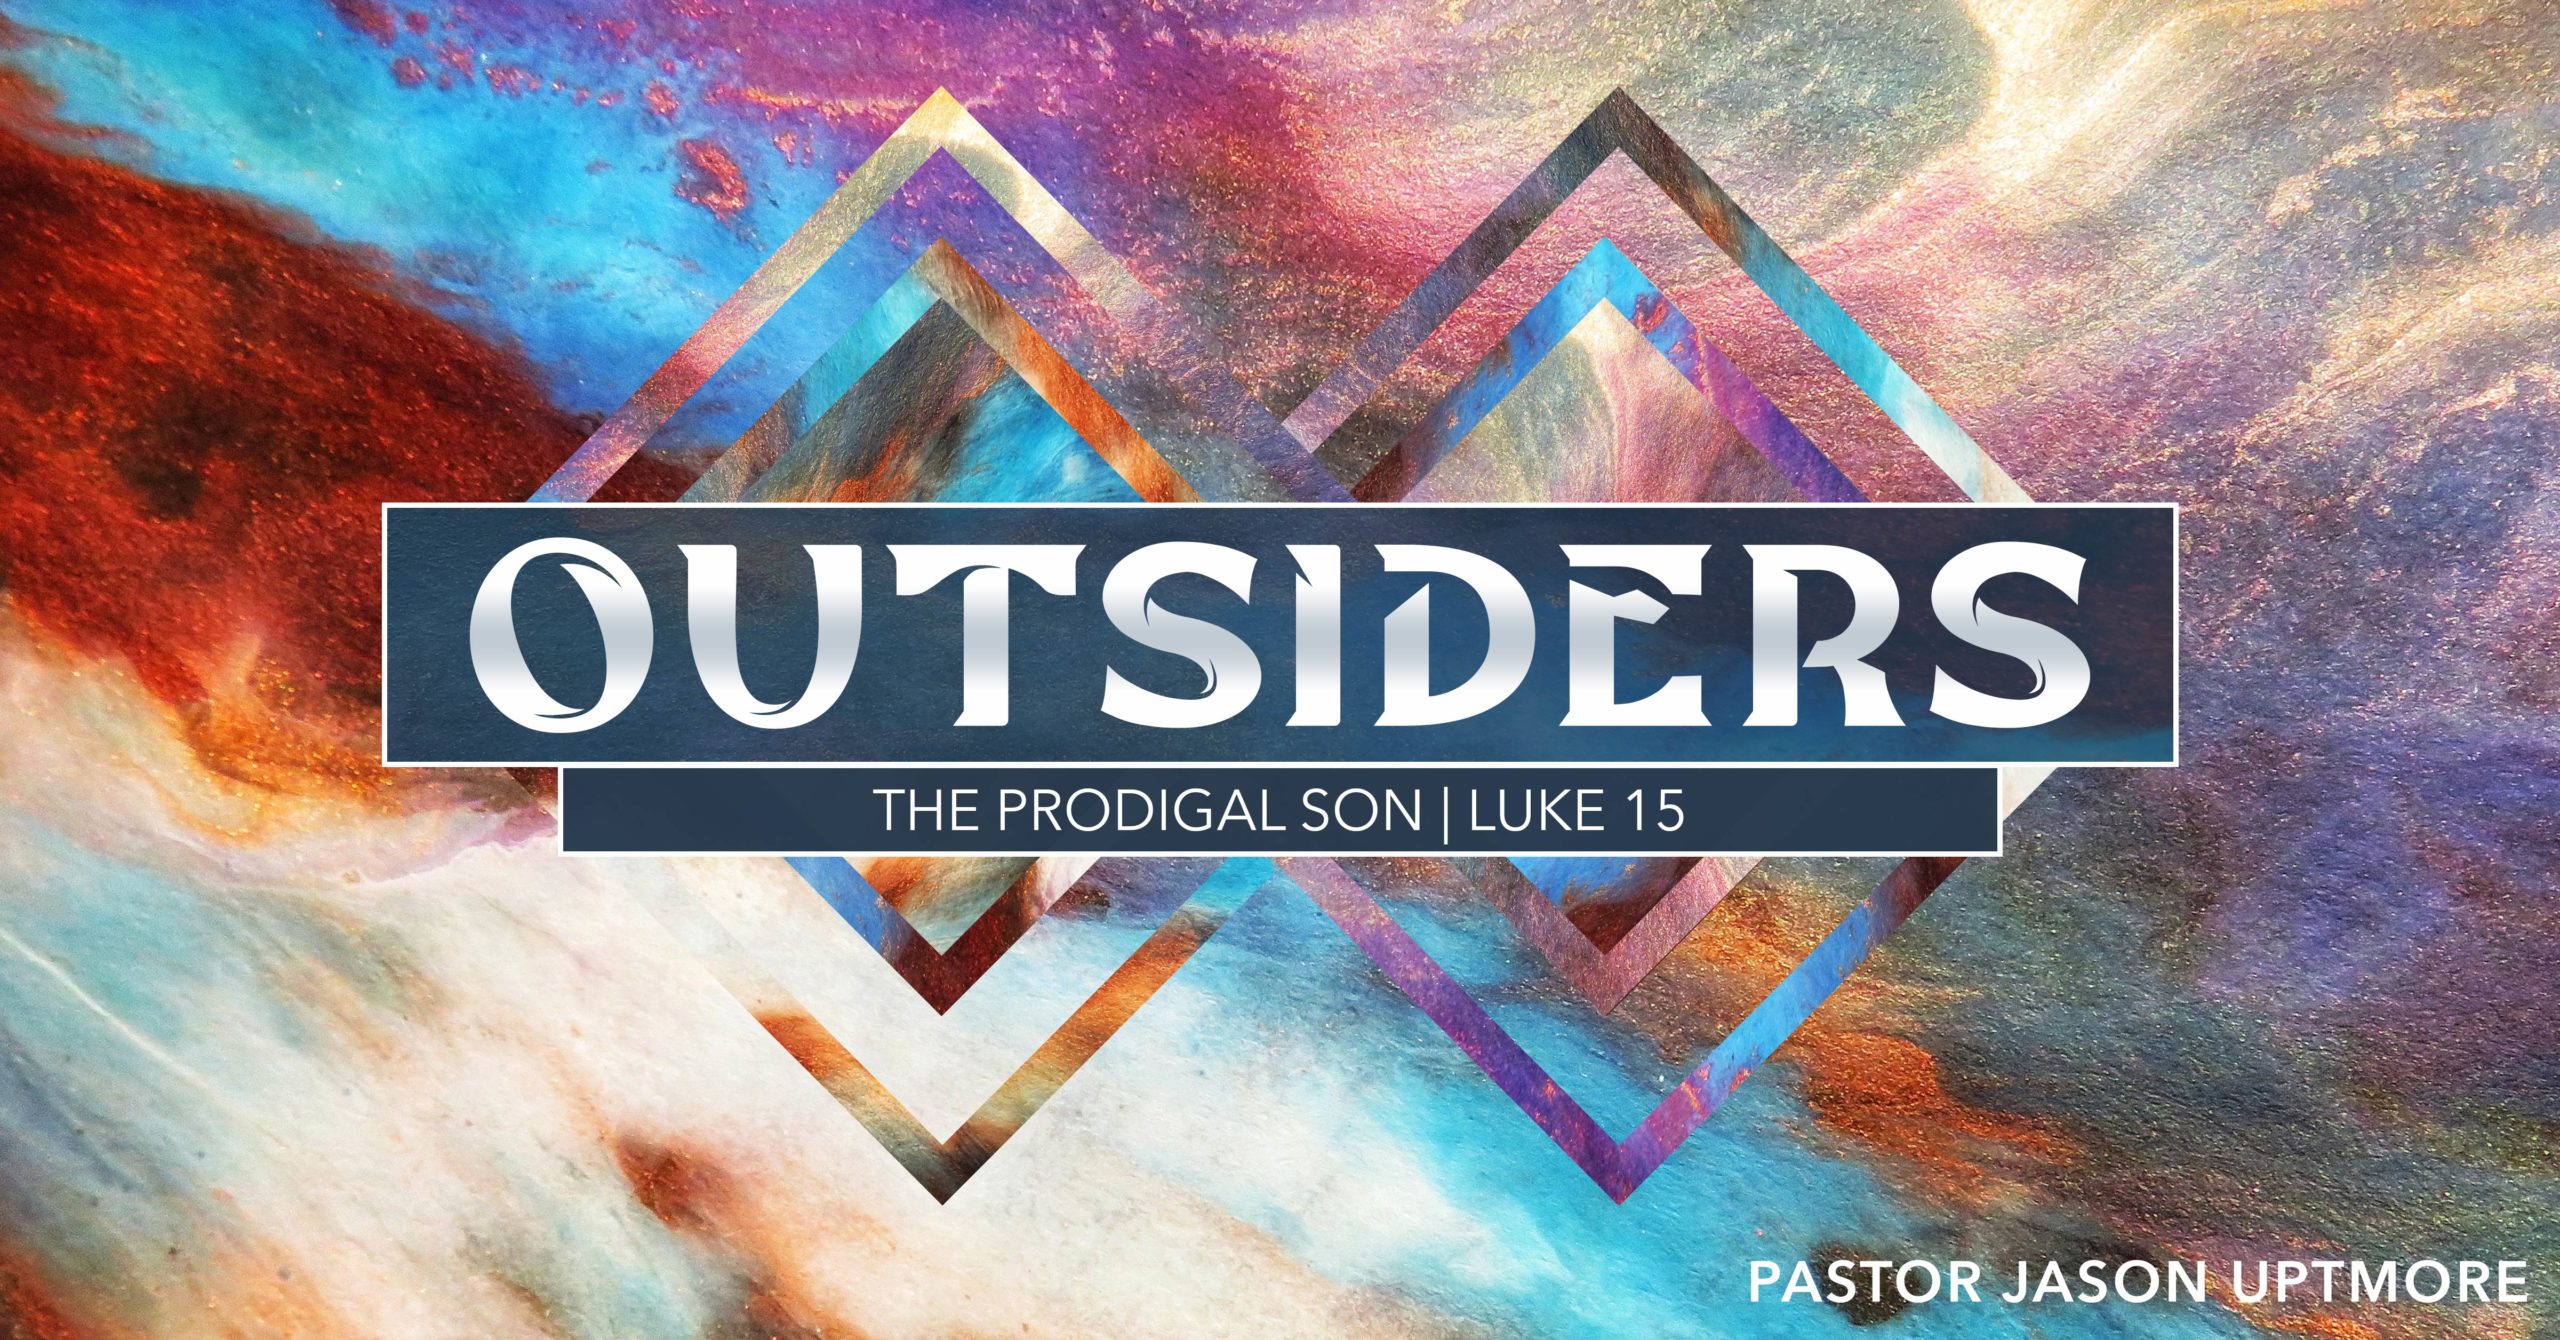 Outsiders: The Prodigal Son